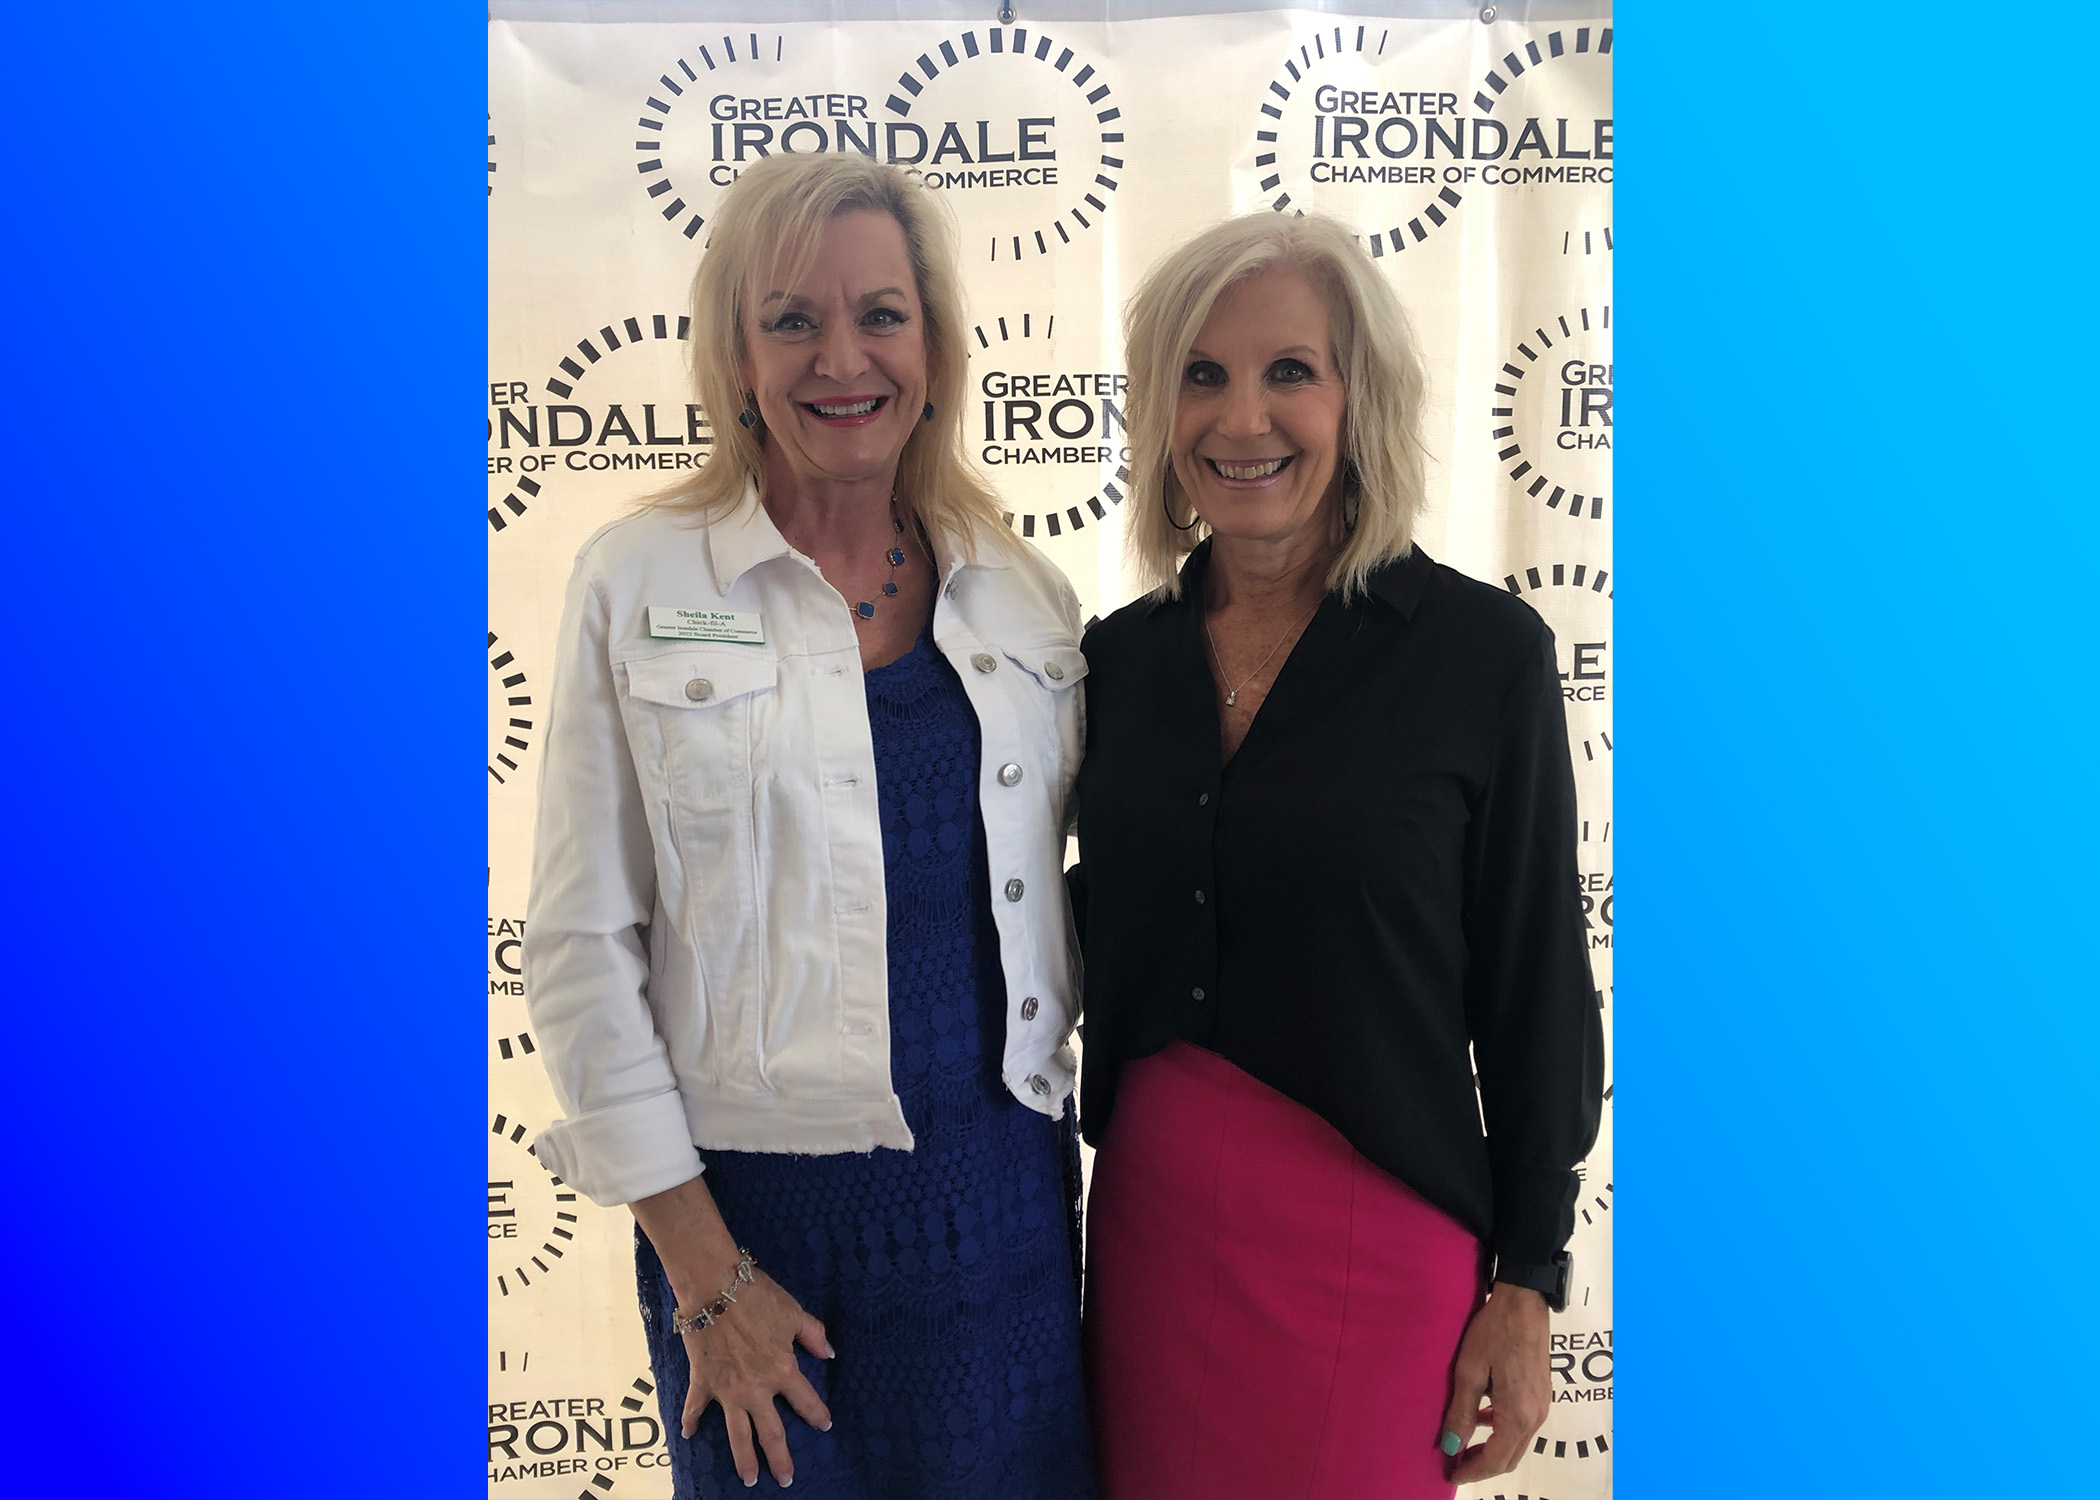 Speaker shares thoughts on 'Making Your Mark' at Irondale Chamber Luncheon